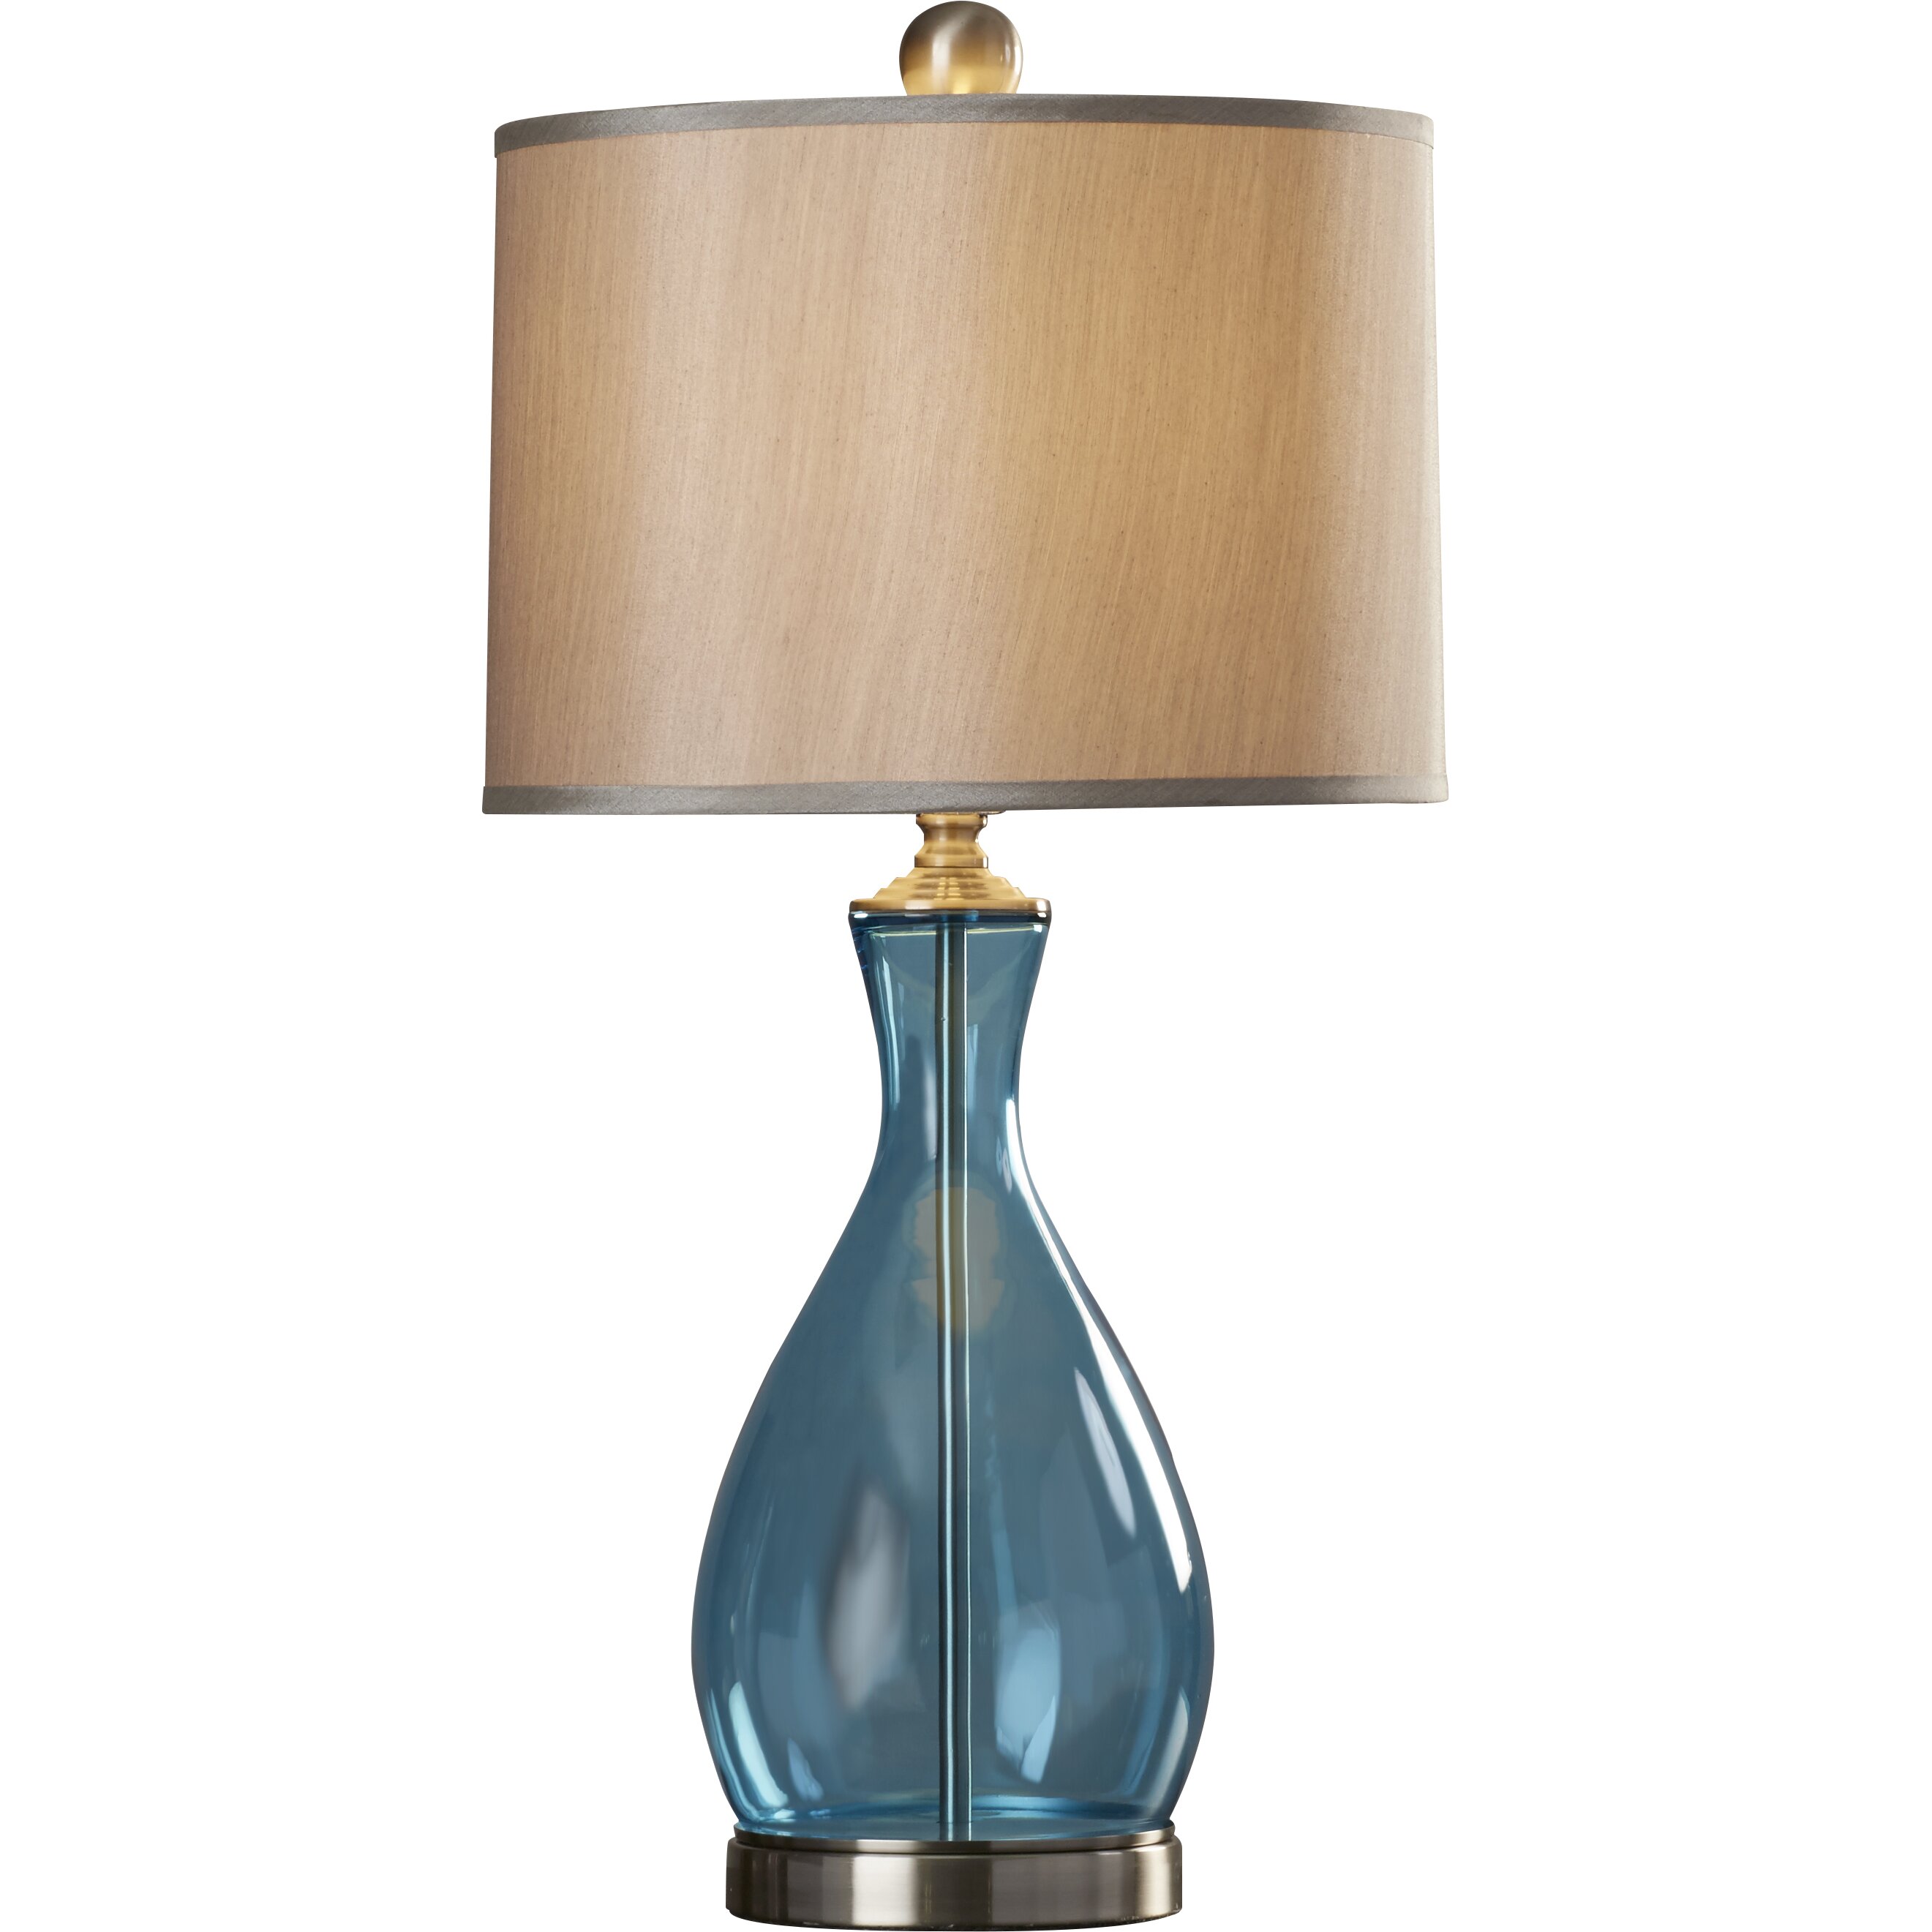 Beachcrest Home Fairhaven 29" H Table Lamp with Drum Shade